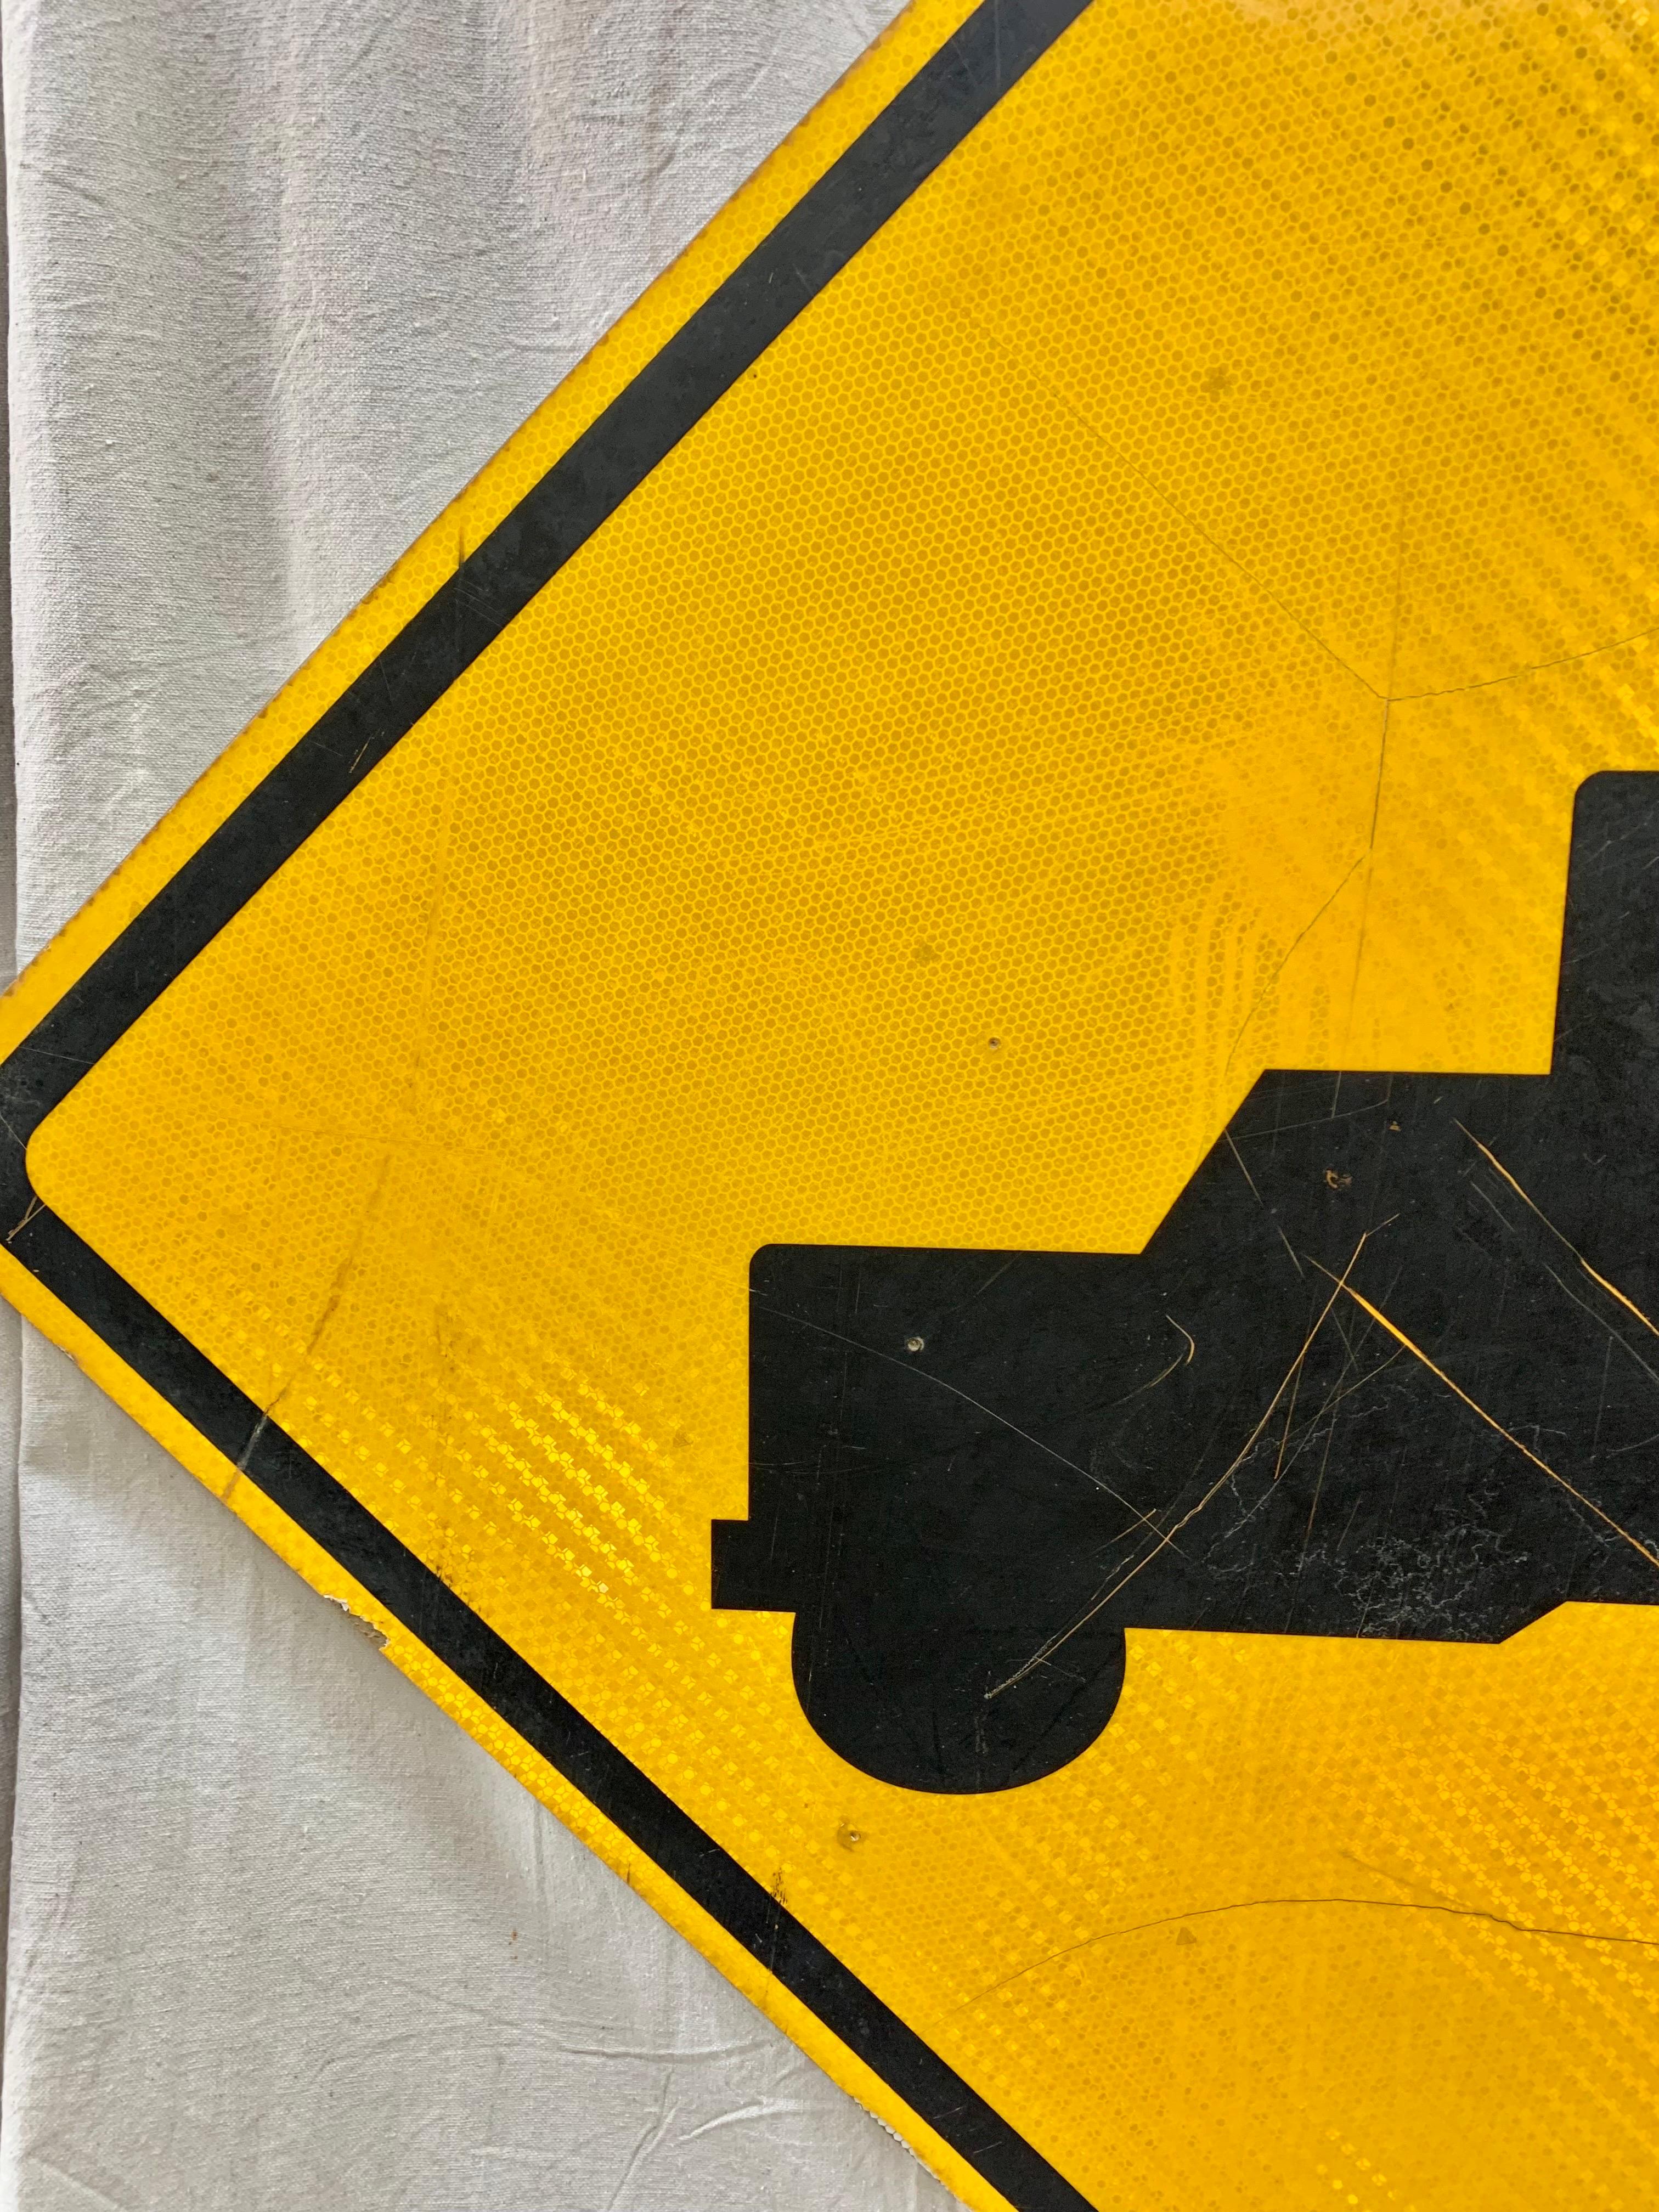 the road sign pictured means